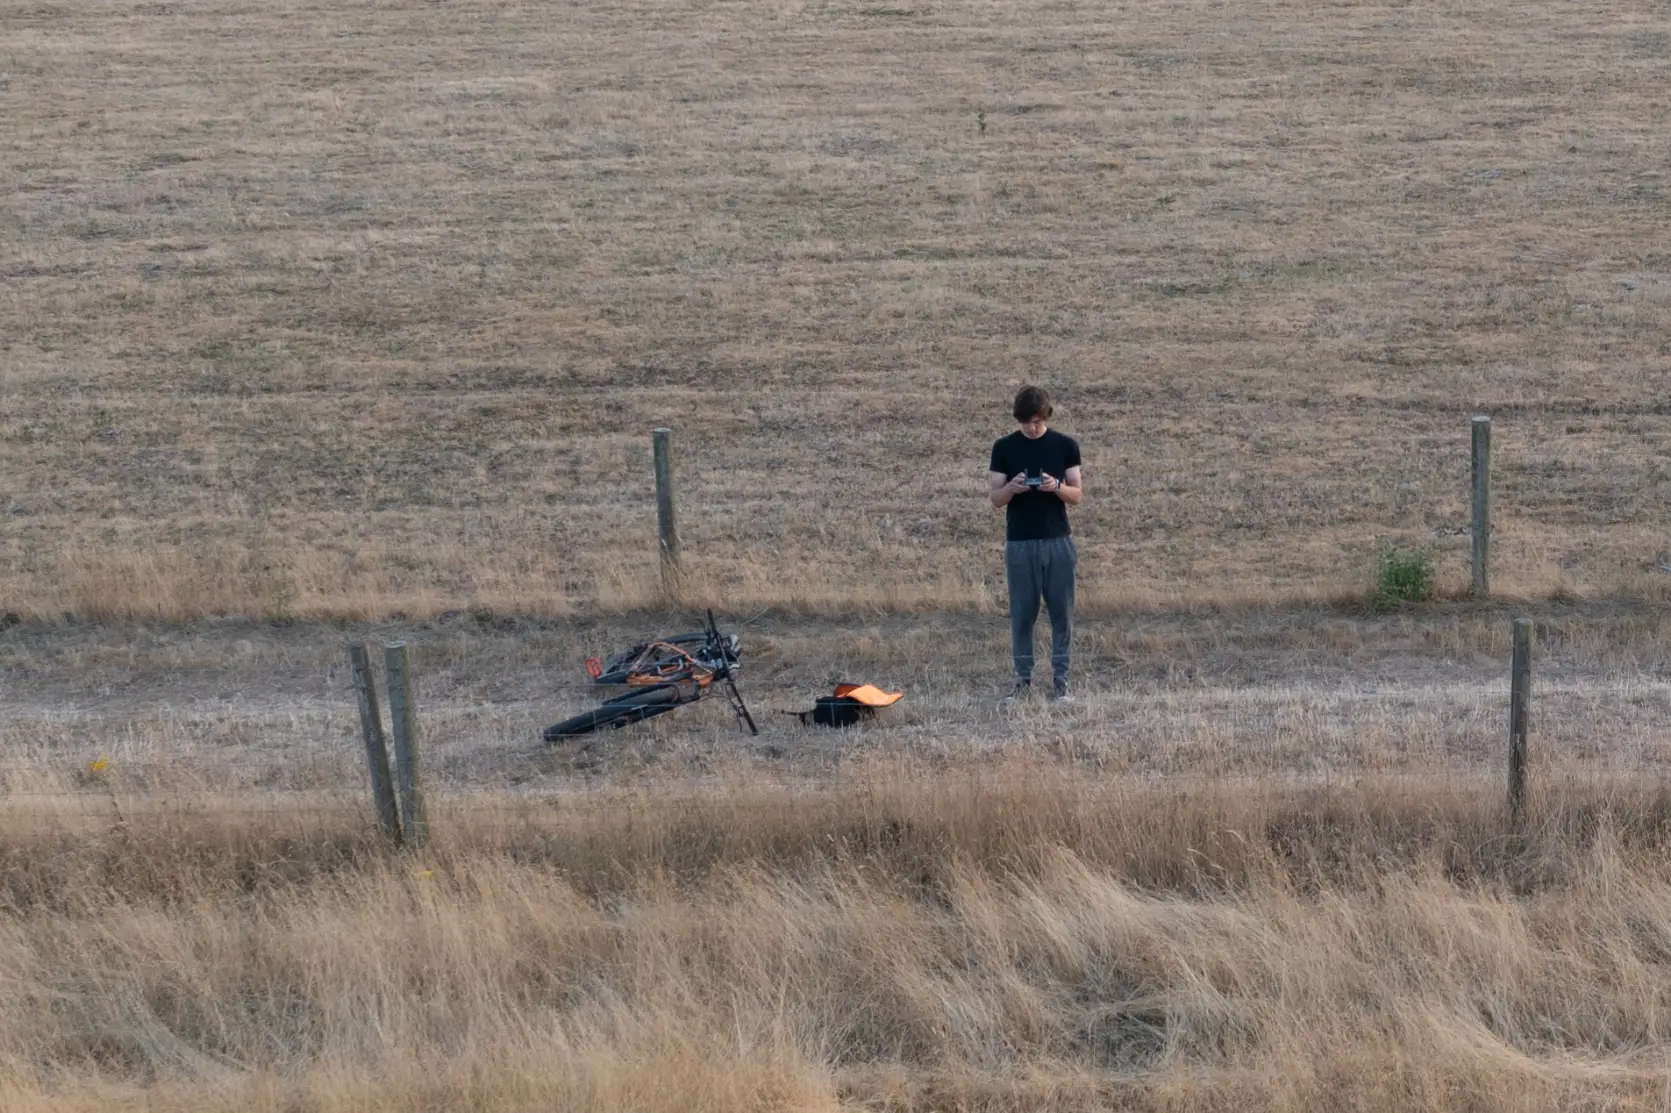 Tom flying his drone in a field, photo taken from above